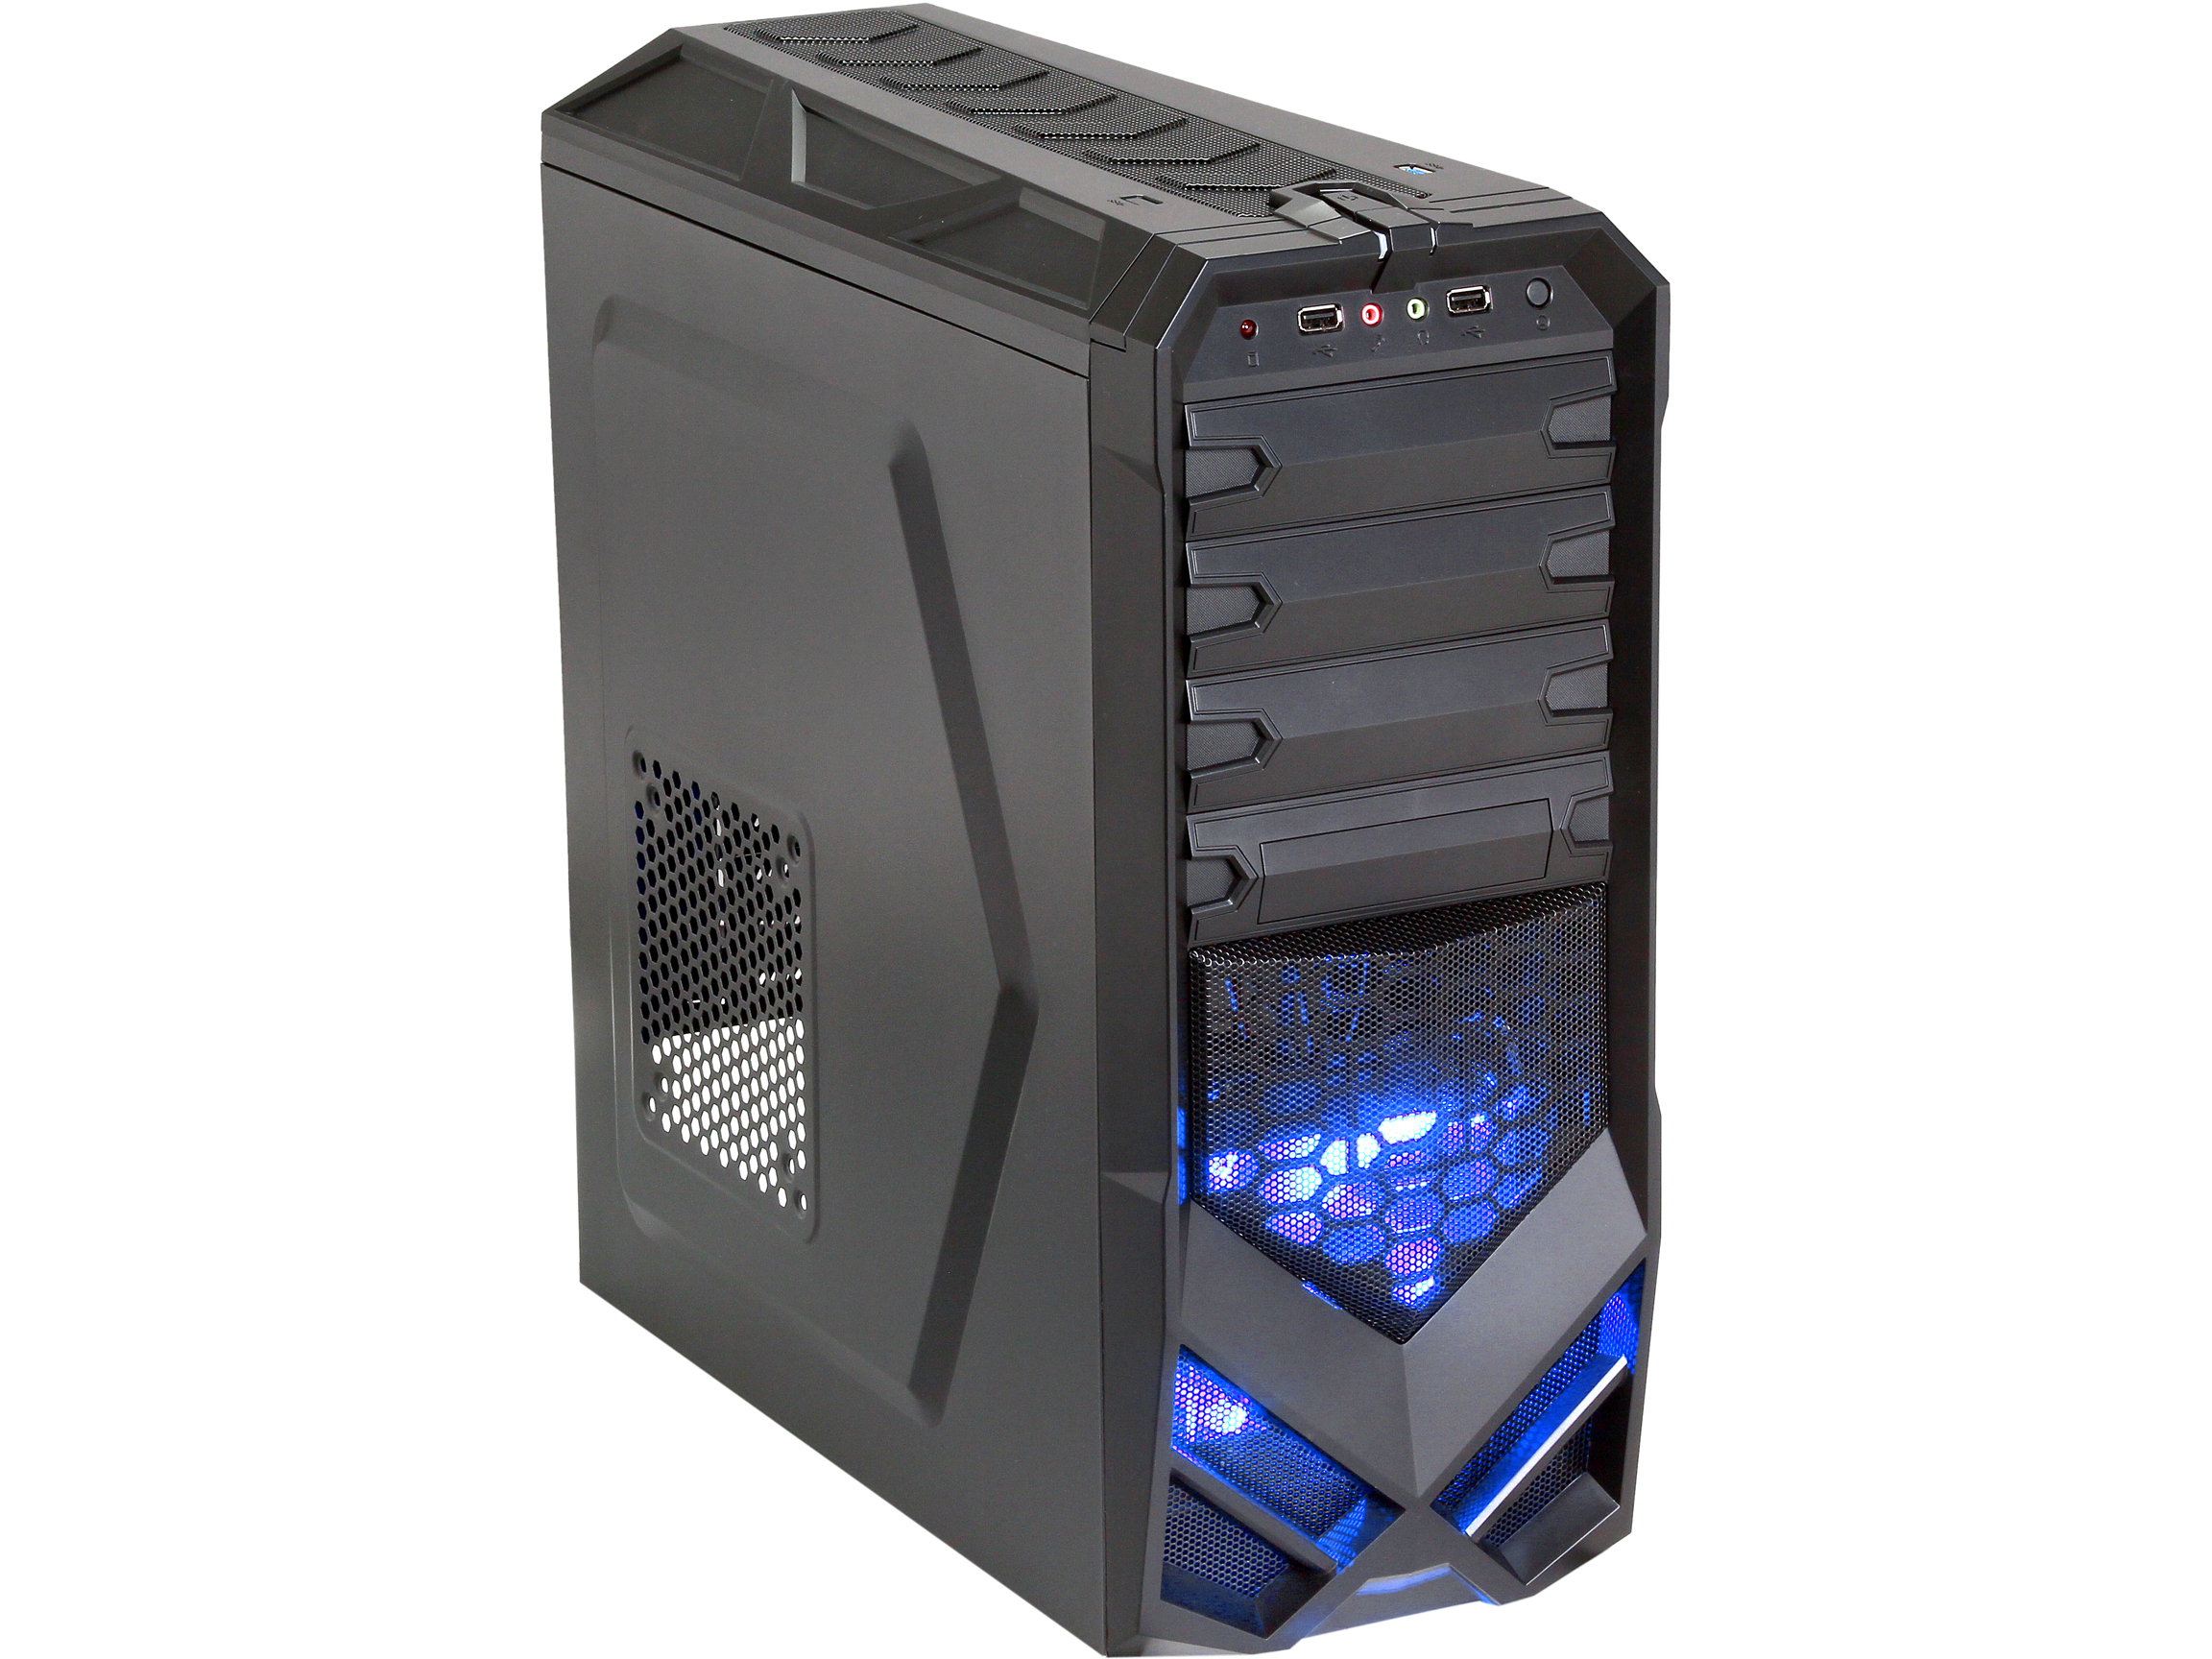 Rosewill Galaxy 01 ATX Mid Tower Black Gaming Computer Case